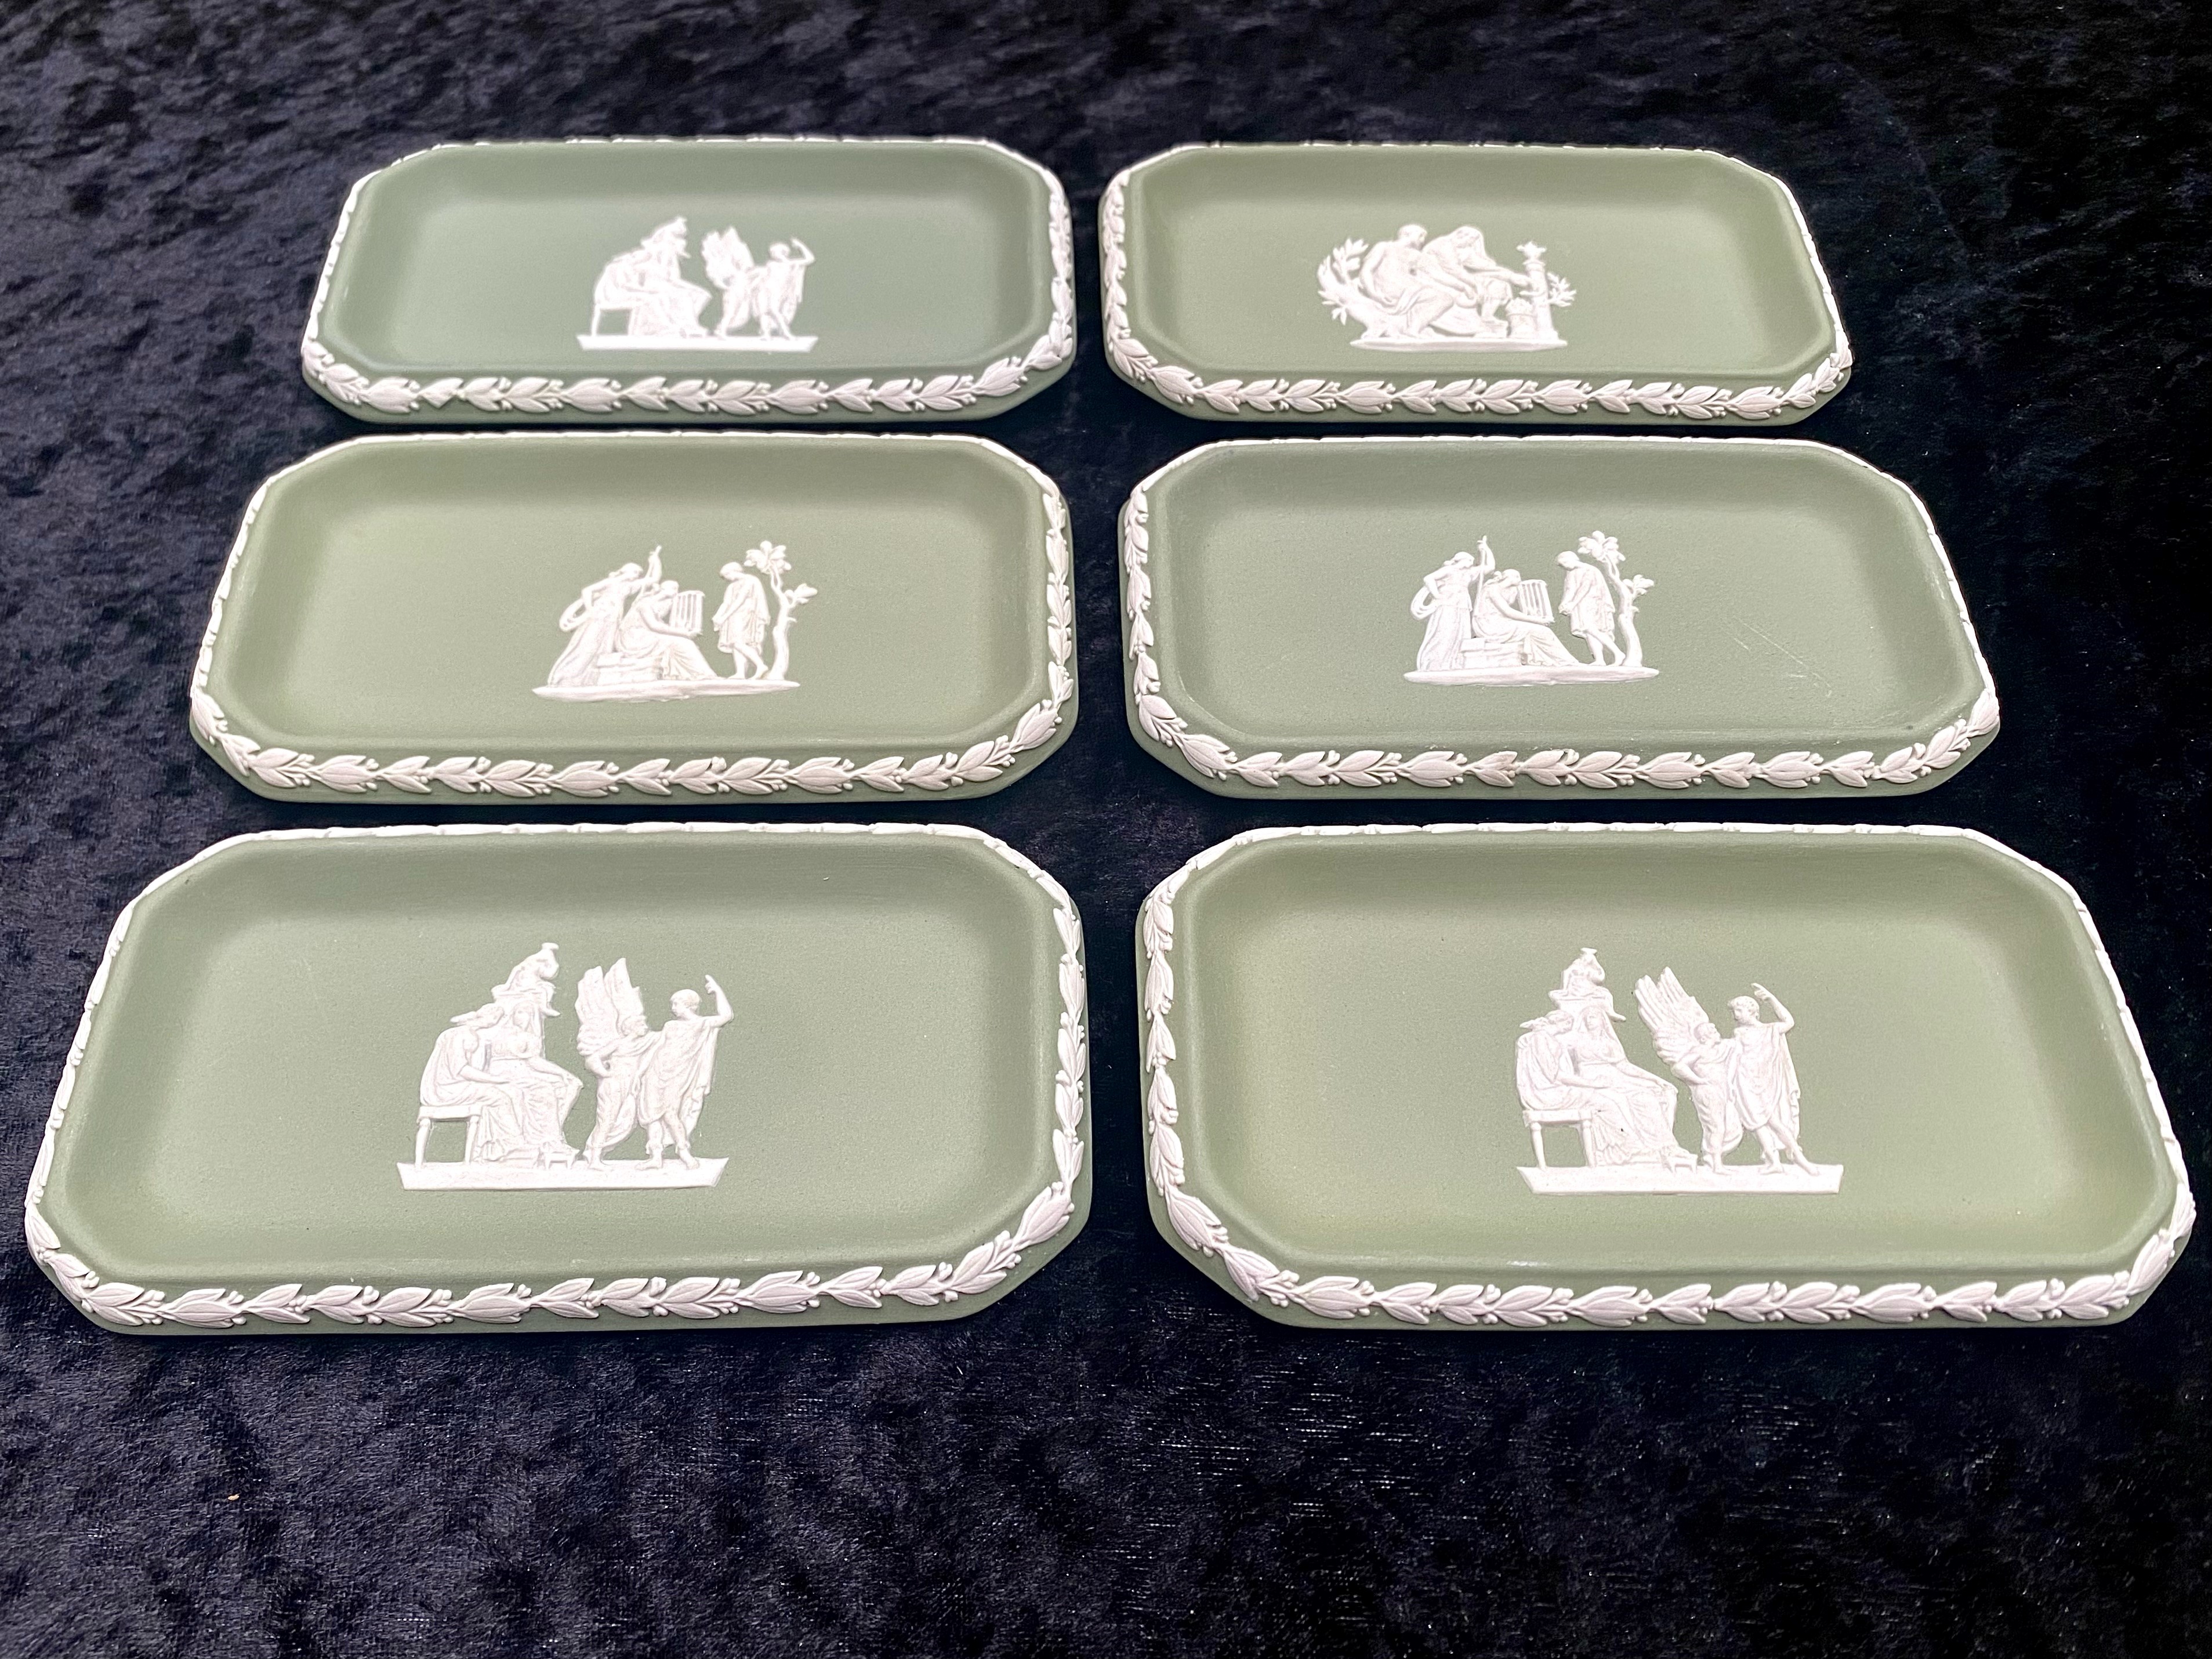 Wedgwood Green Jasper Ware 6 x Oblong Dishes. In very good condition with original box. - Image 2 of 4